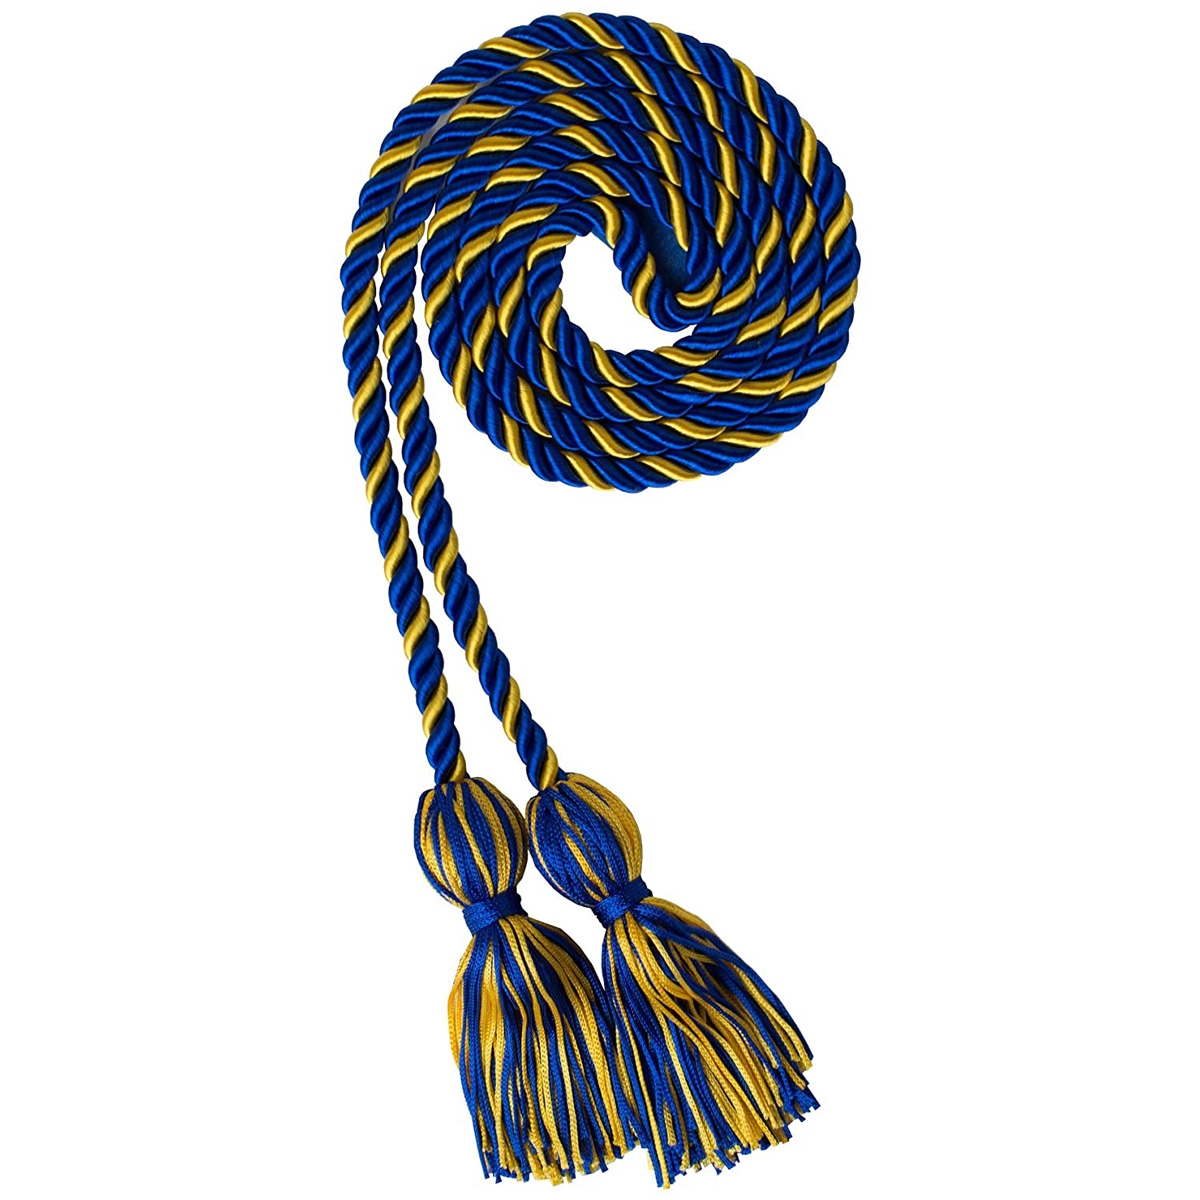 Class Act Graduation 60 Academic Honor Cord, Royal Blue & Gold Braided